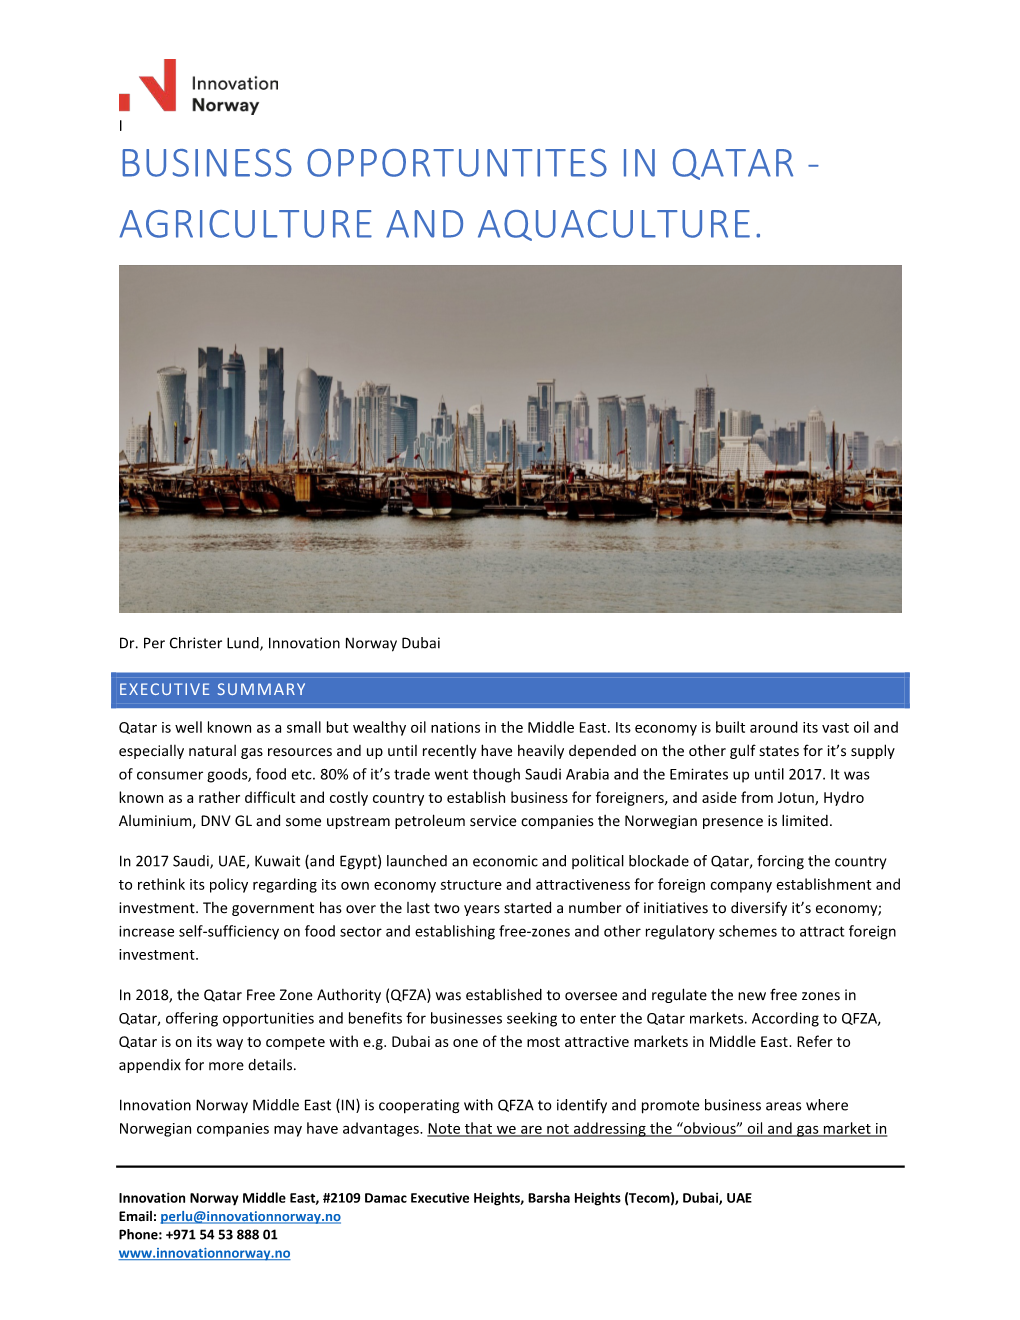 Business Opportuntites in Qatar - Agriculture and Aquaculture